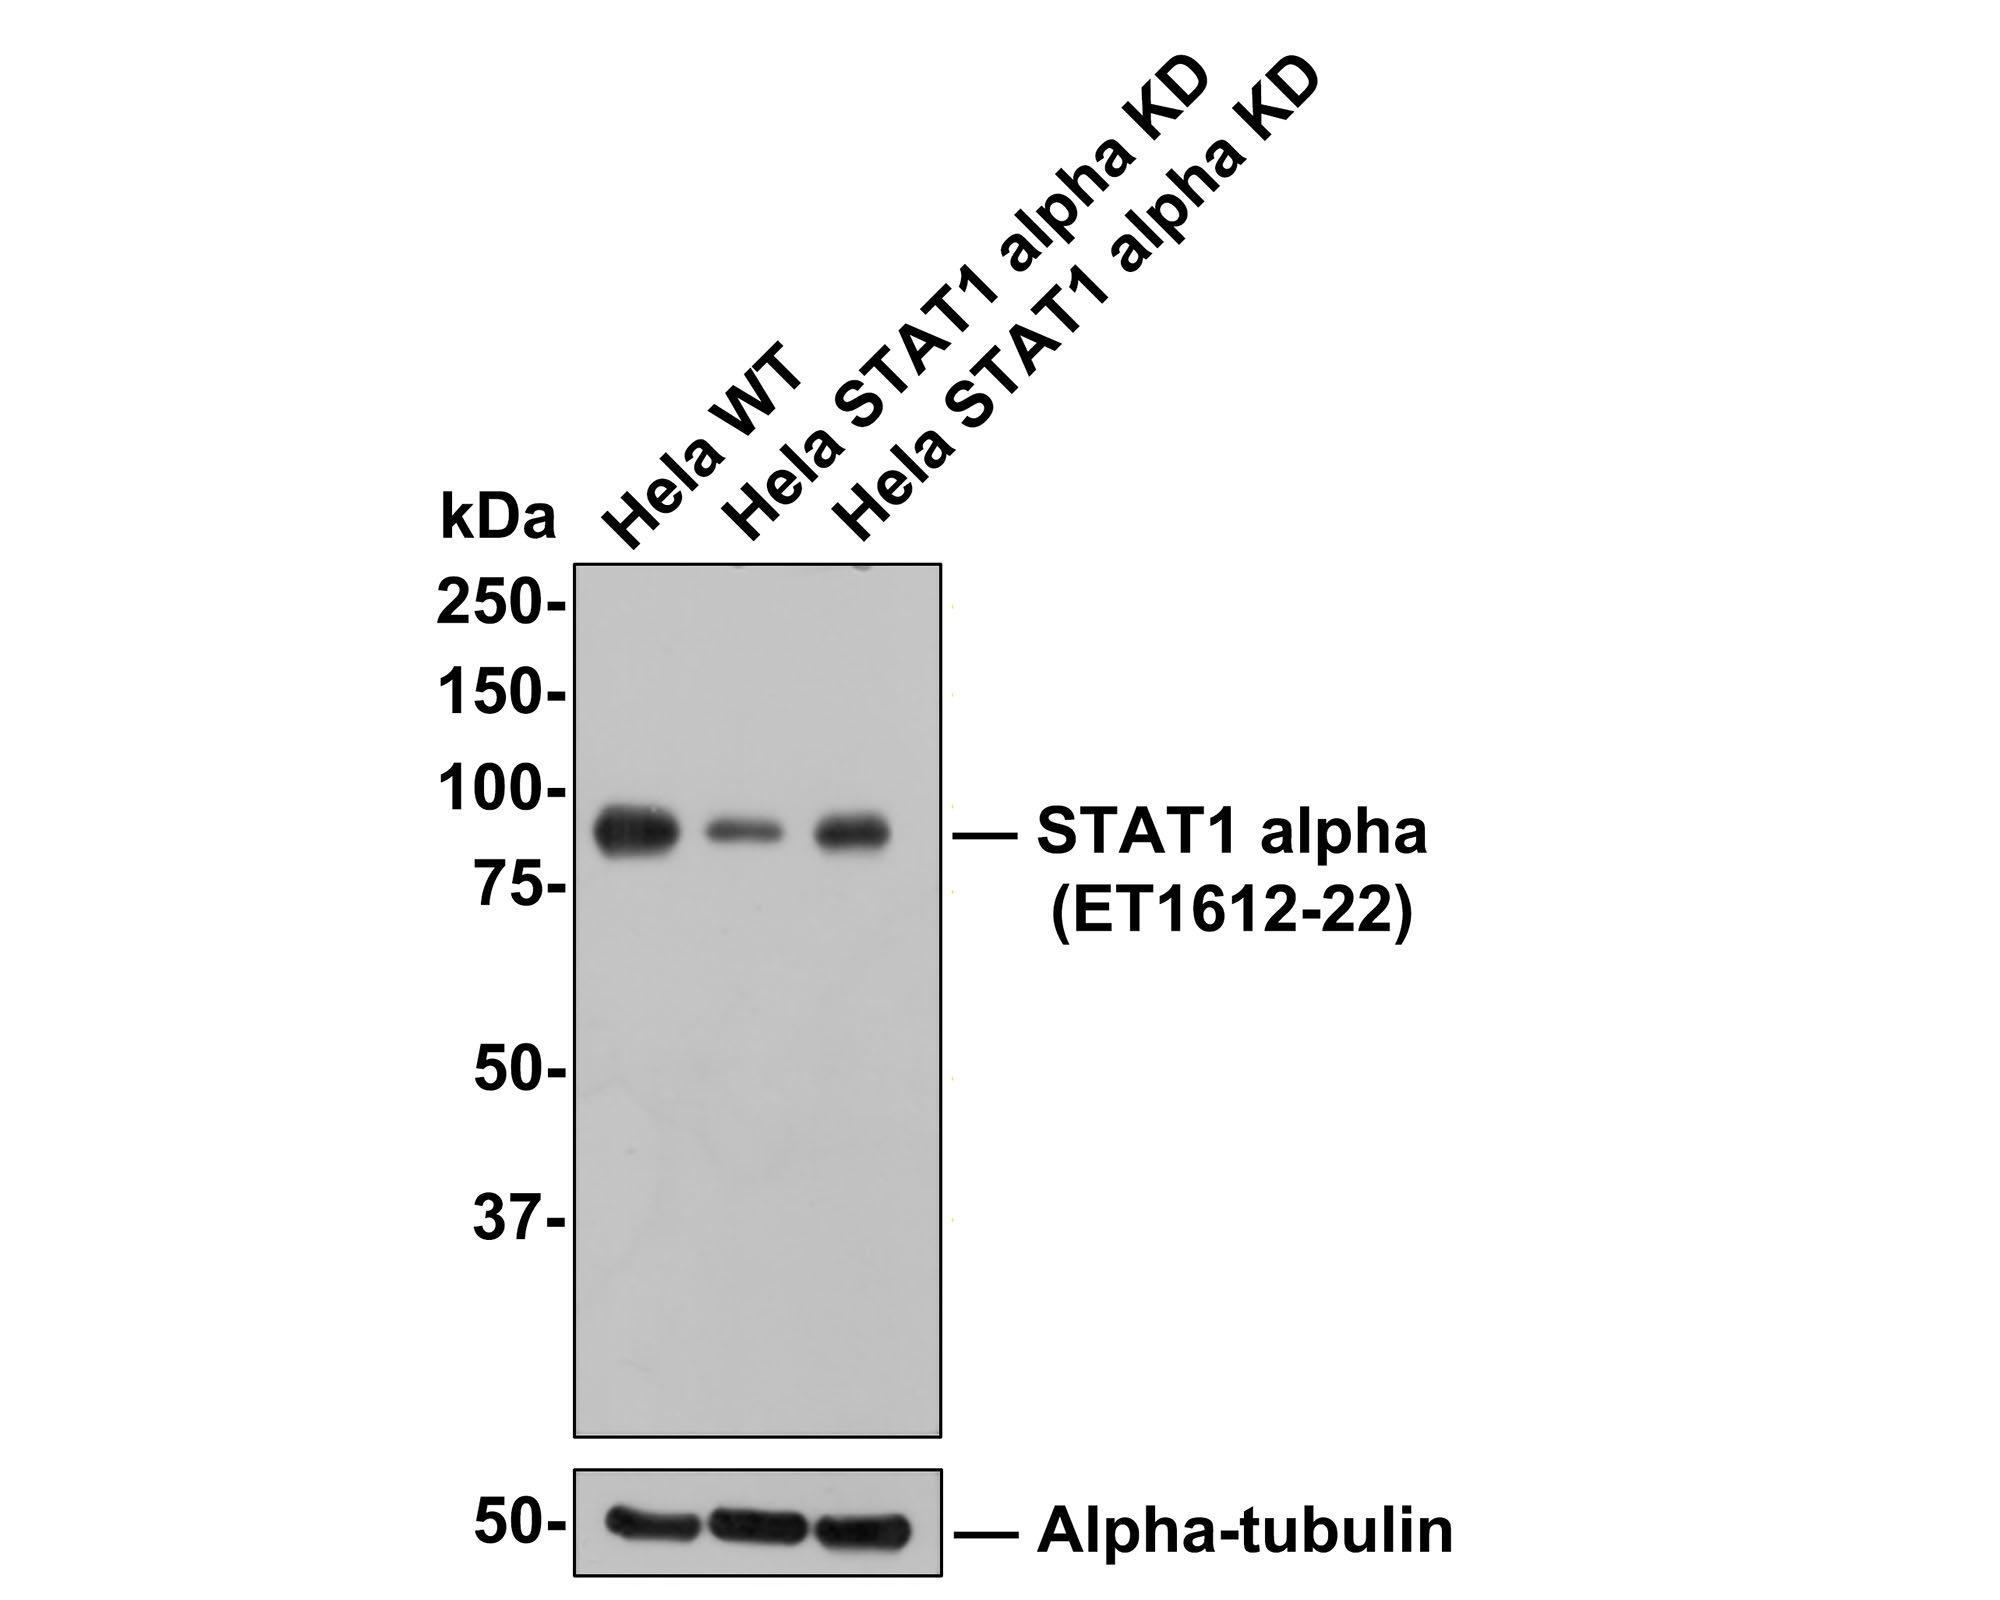 All lanes: Western blot analysis of STAT1 alpha with anti-STAT1 alpha antibody (ET1612-22) at 1:500 dilution.<br />
Lane 1: Wild-type Hela whole cell lysate (10 µg).<br />
Lane 2/3: STAT1 alpha knockdown Hela whole cell lysate (10 µg).<br />
<br />
ET1612-22 was shown to specifically react with STAT1 alpha in wild-type Hela cells. Weakened bands were observed when STAT1 alpha knockdown samples were tested. Wild-type and STAT1 alpha knockdown samples were subjected to SDS-PAGE. Proteins were transferred to a PVDF membrane and blocked with 5% NFDM in TBST for 1 hour at room temperature. The primary antibody (ET1612-22, 1:500) was used in 5% BSA at room temperature for 2 hours. Goat Anti-Rabbit IgG-HRP Secondary Antibody (HA1001) at 1:300,000 dilution was used for 1 hour at room temperature.